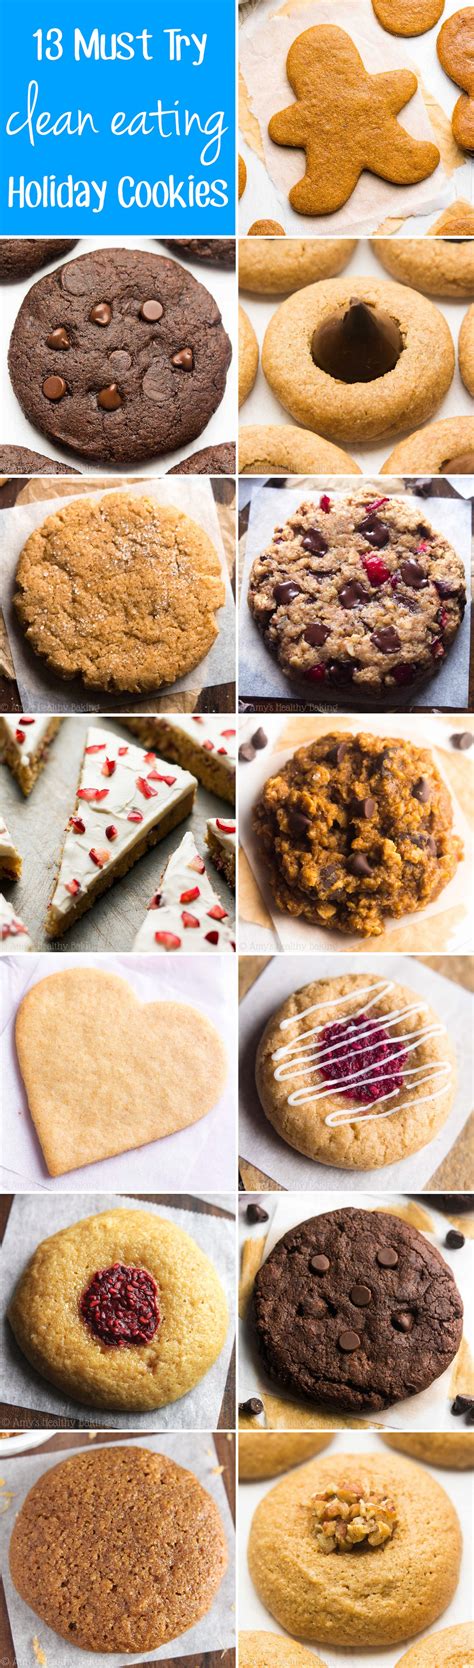 clean eating holiday cookie recipes amys healthy baking